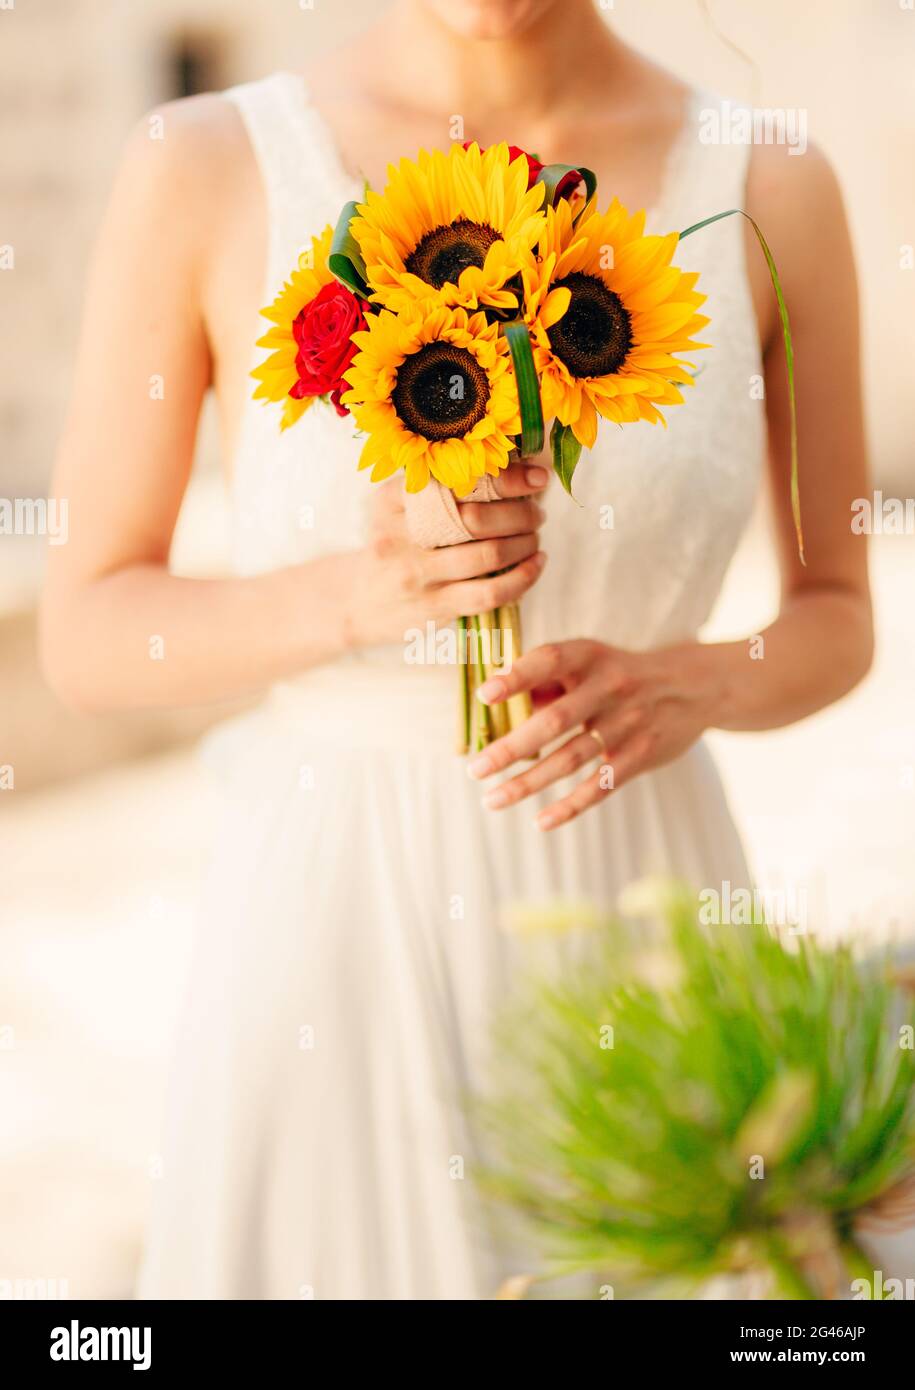 Wedding bridal bouquet of sunflowers in the hands of the bride. Stock Photo